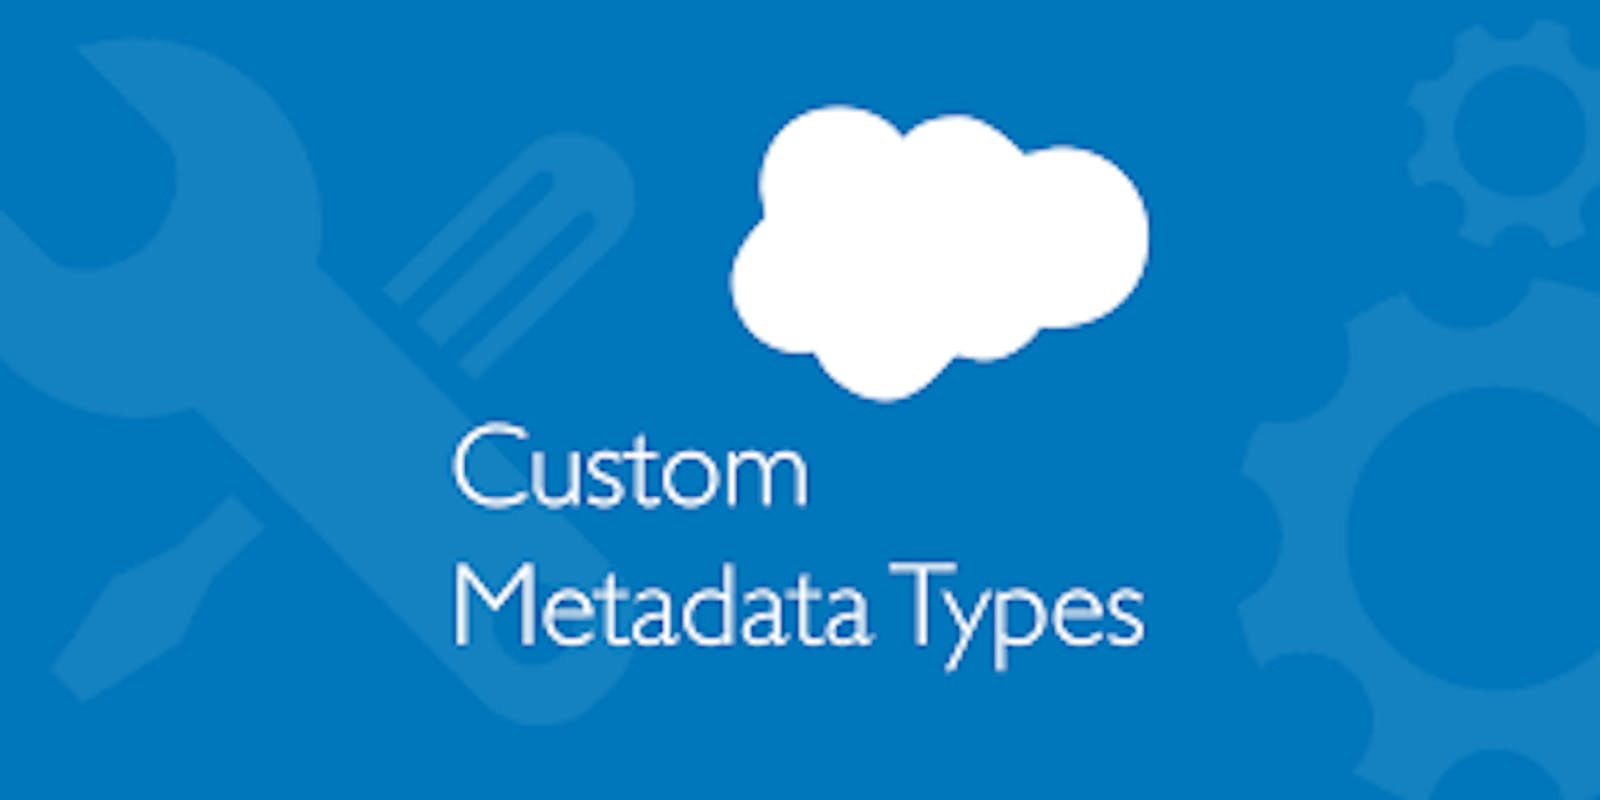 Introduction to Custom Metadata Types in Salesforce